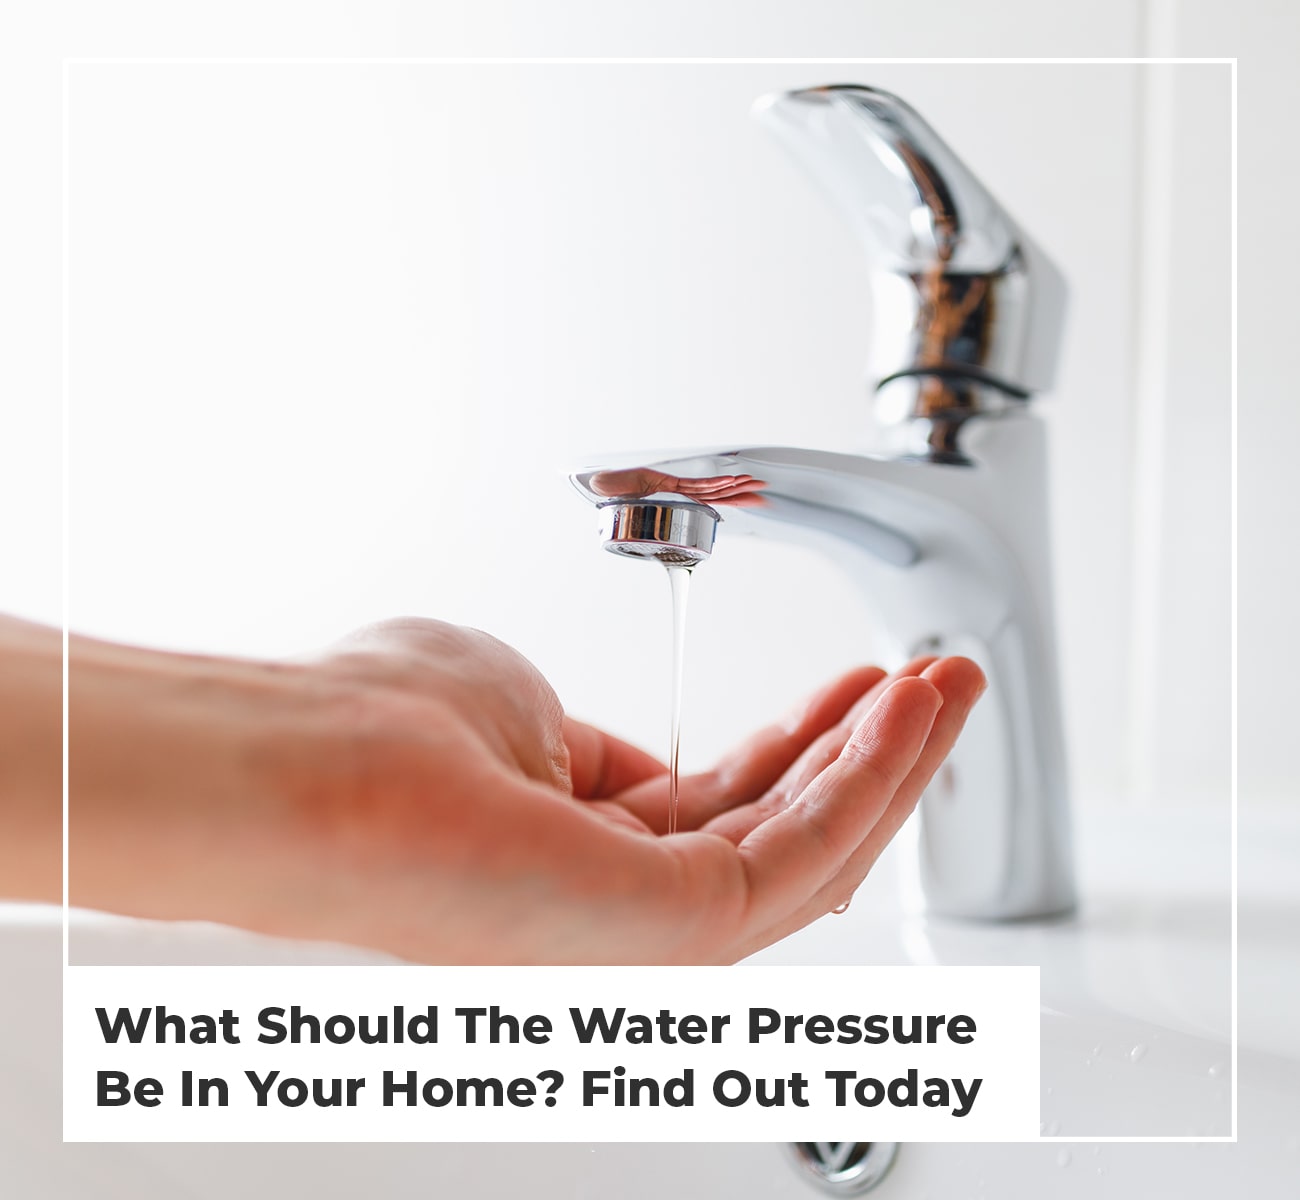 What Should The Water Pressure Be In Your Home? Find Out Today